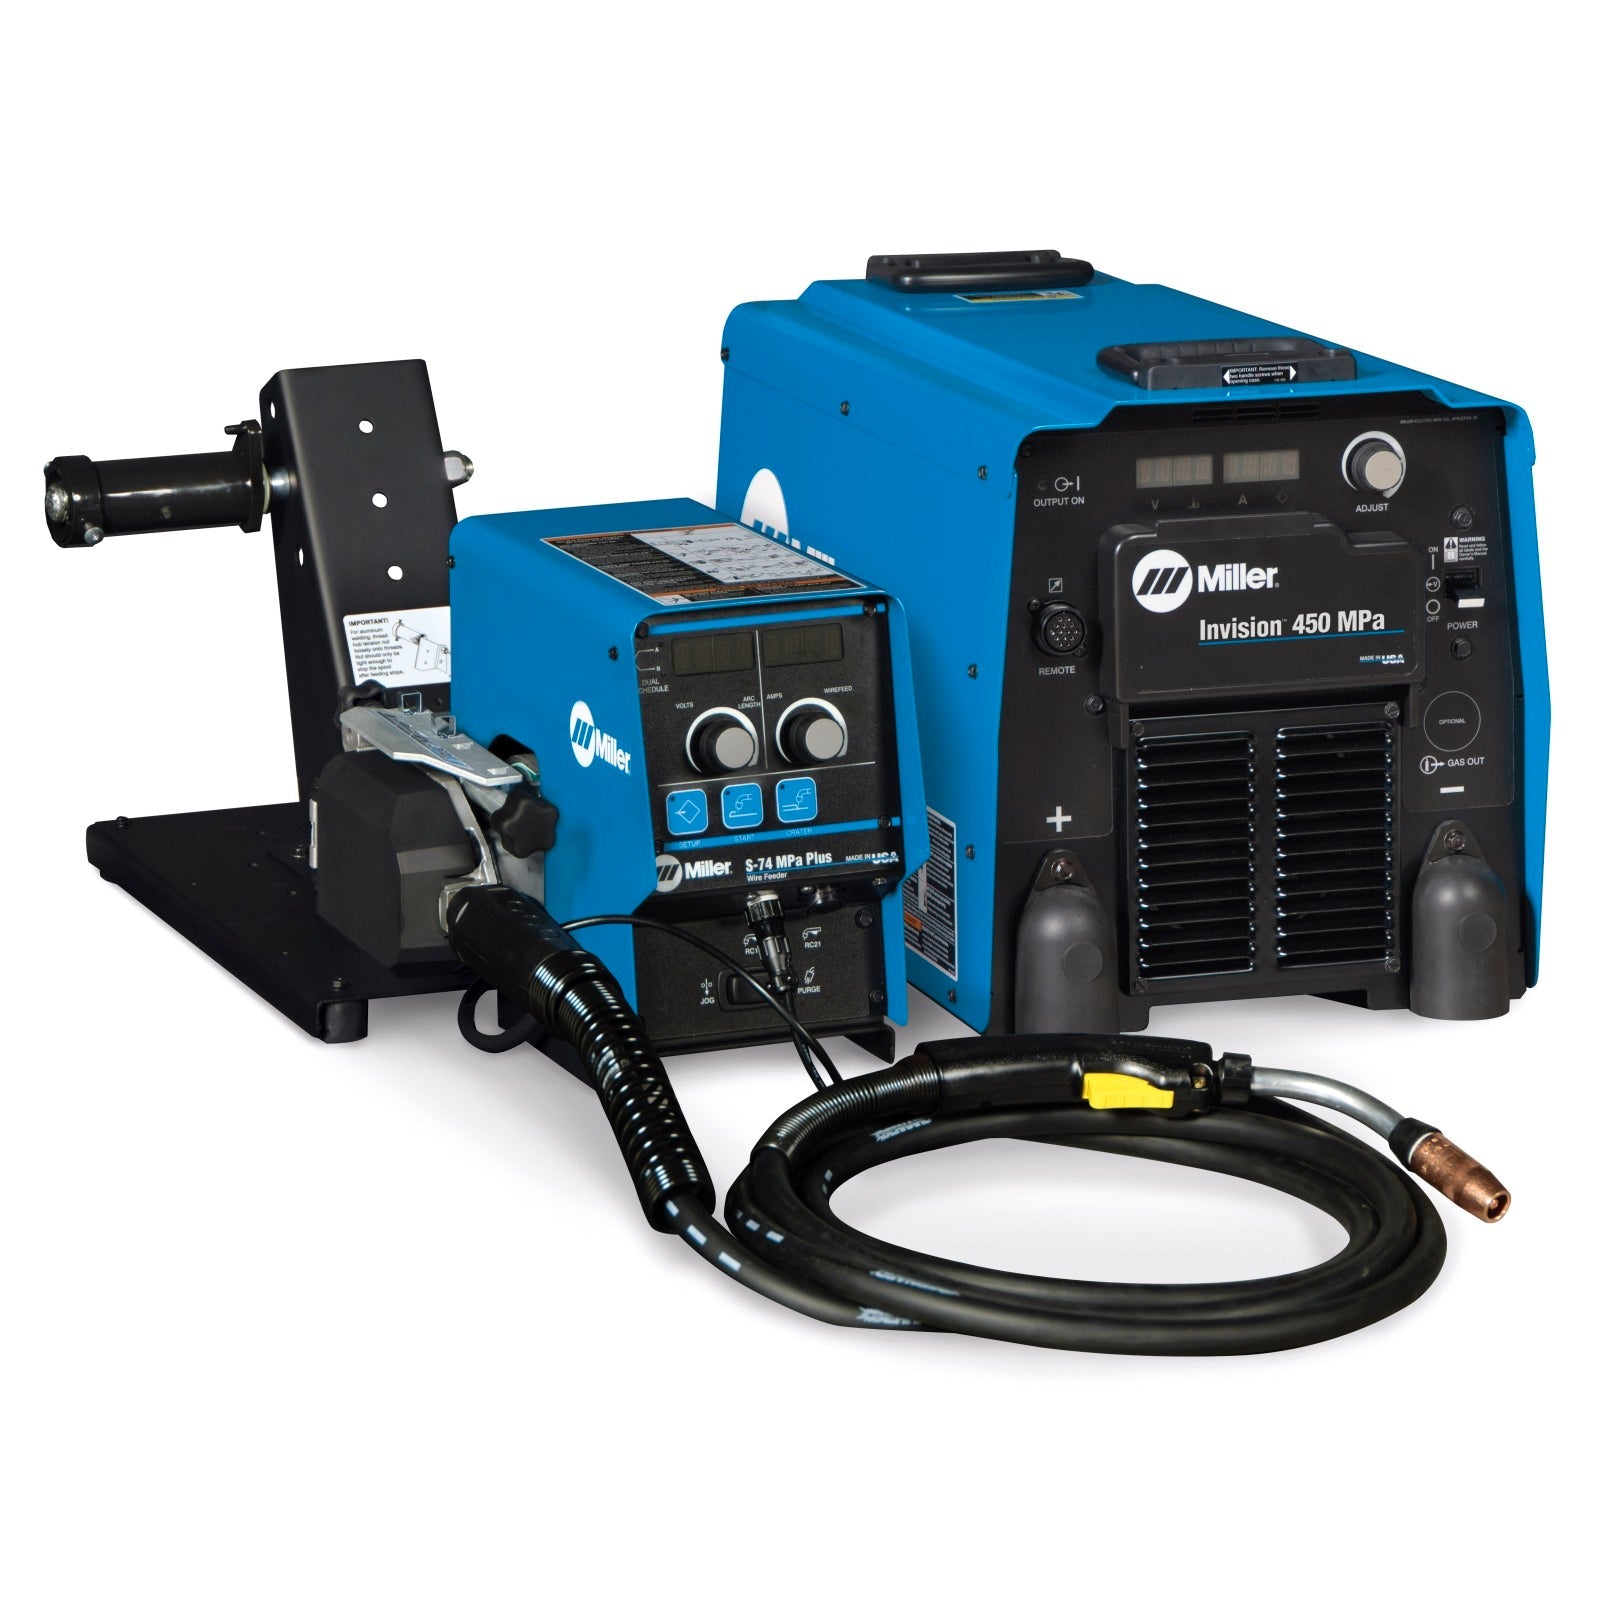 Miller Invision 450 MPa MIG Welder with Feeder, Accessory Package, and Cart (951499)